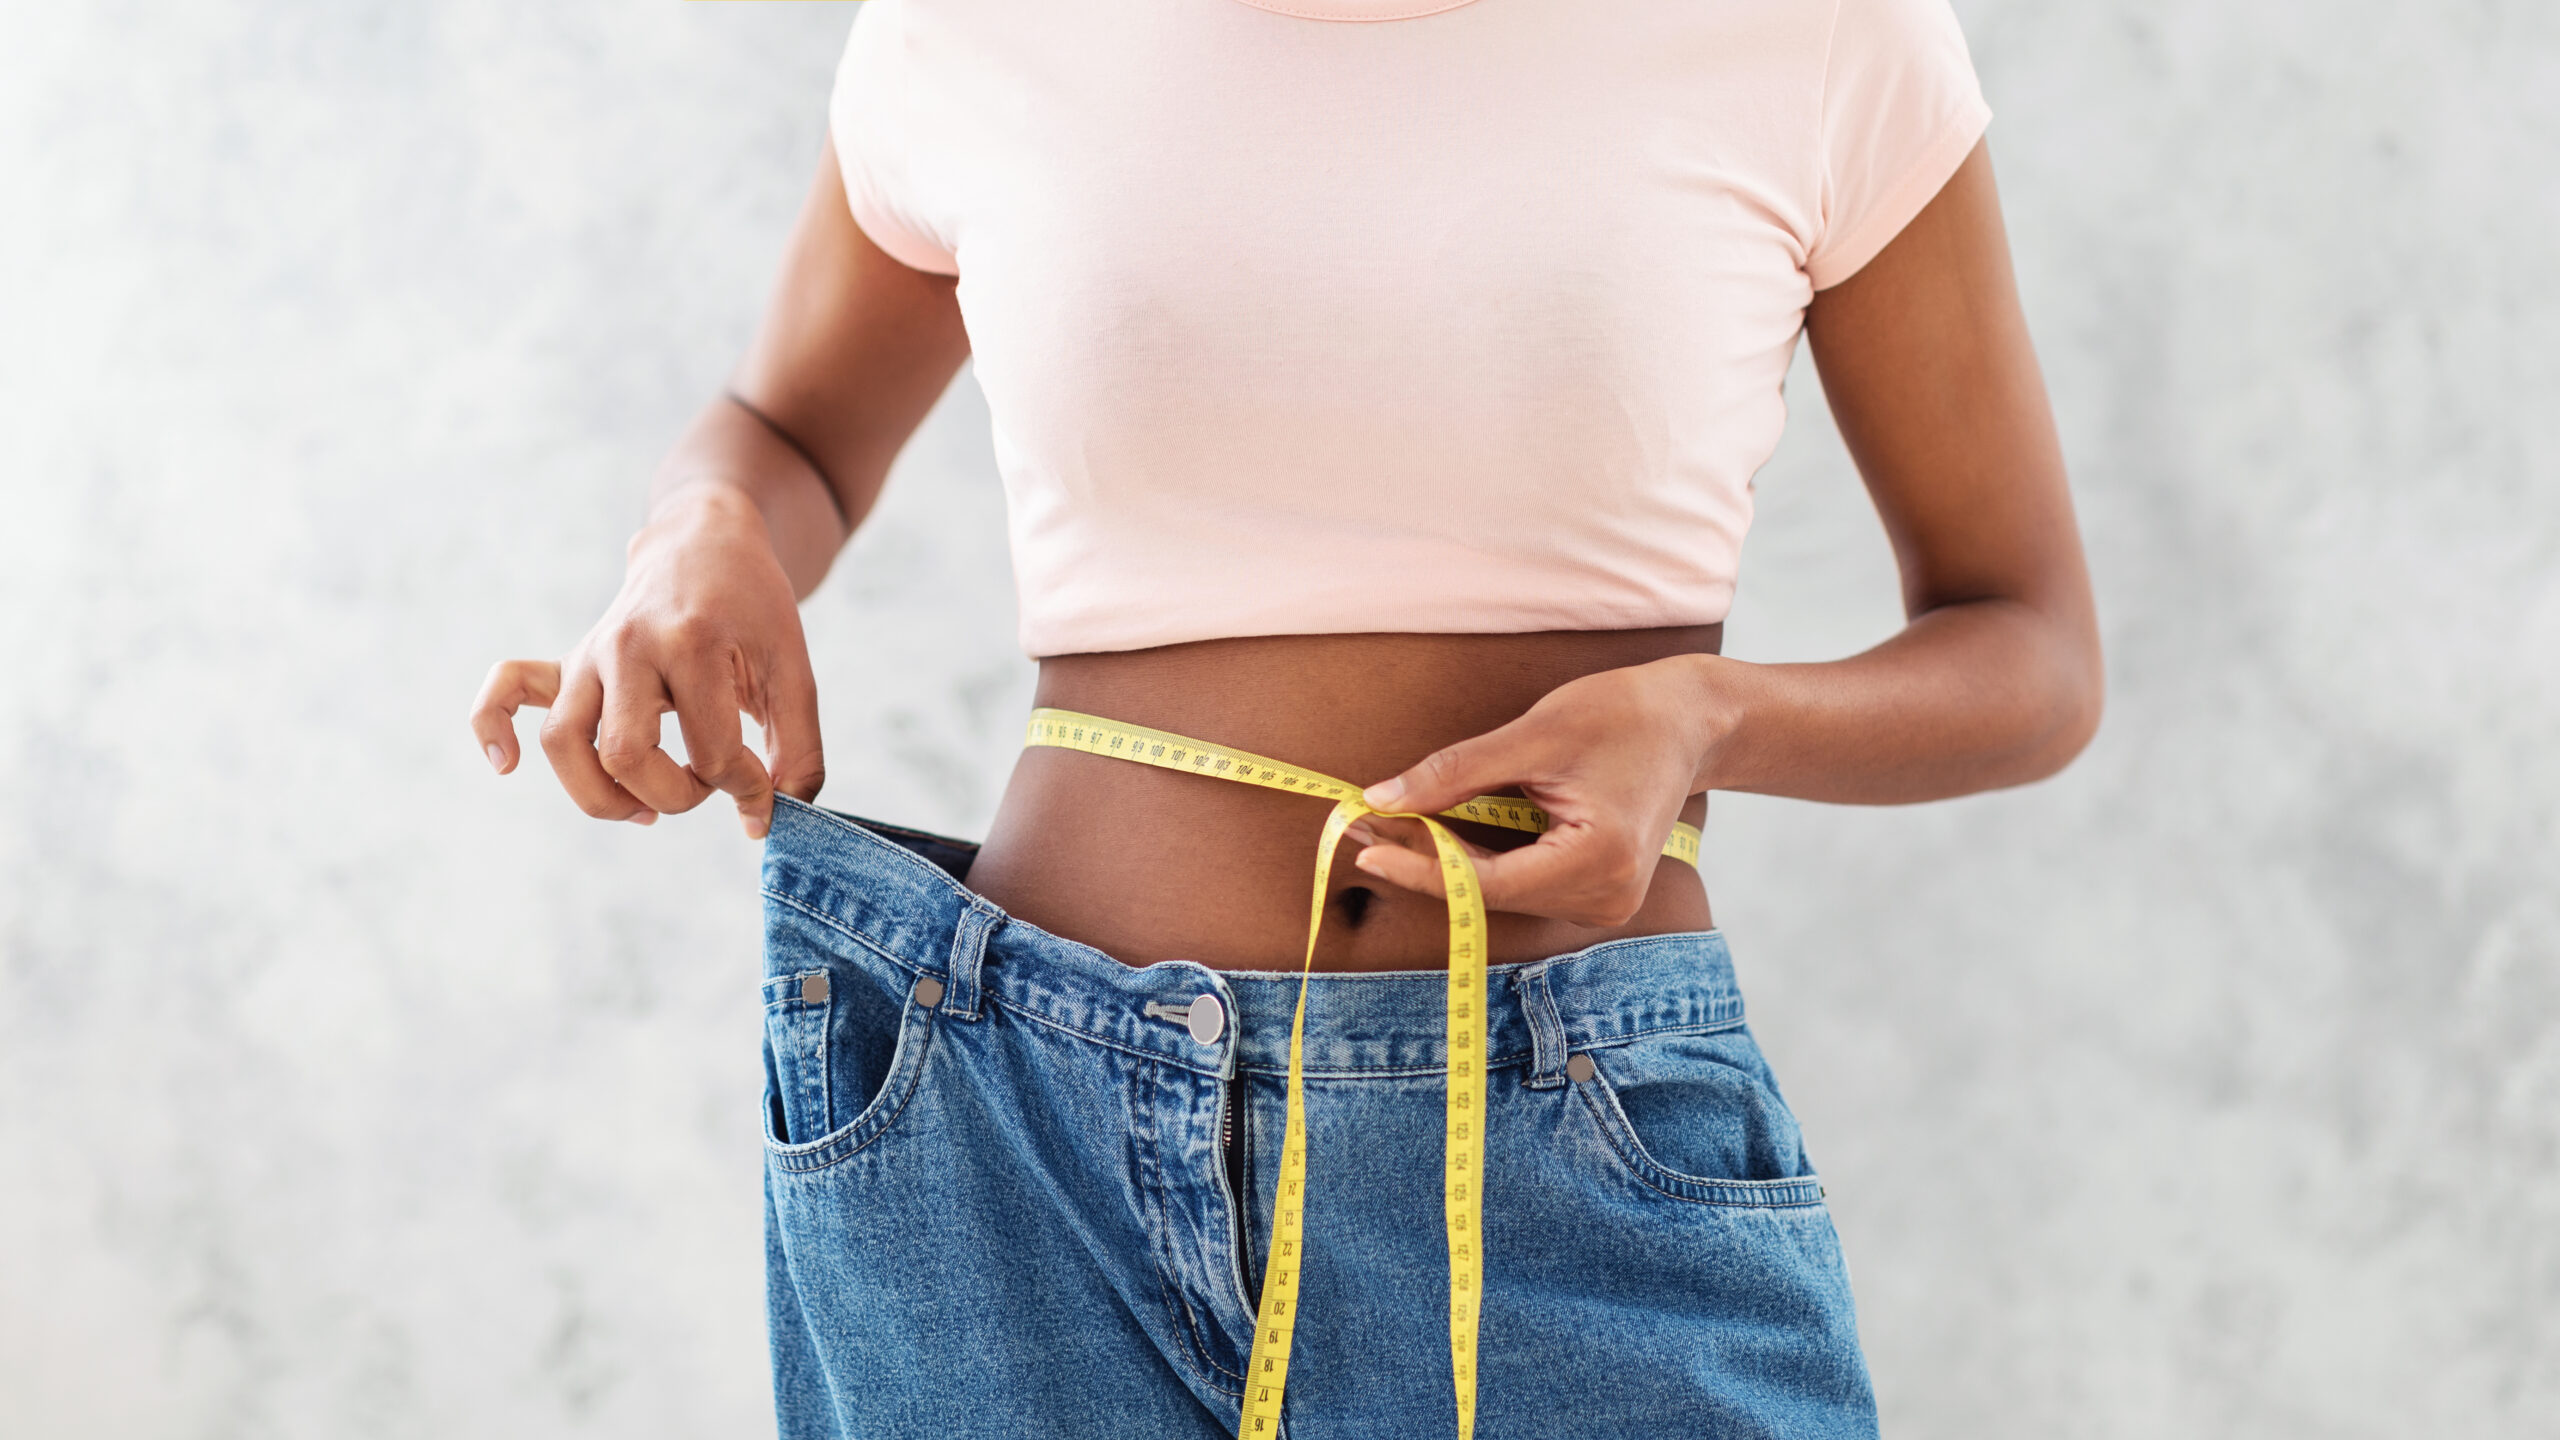 Black woman in old big jeans measuring her waist, showing results of slimming diet or liposuction